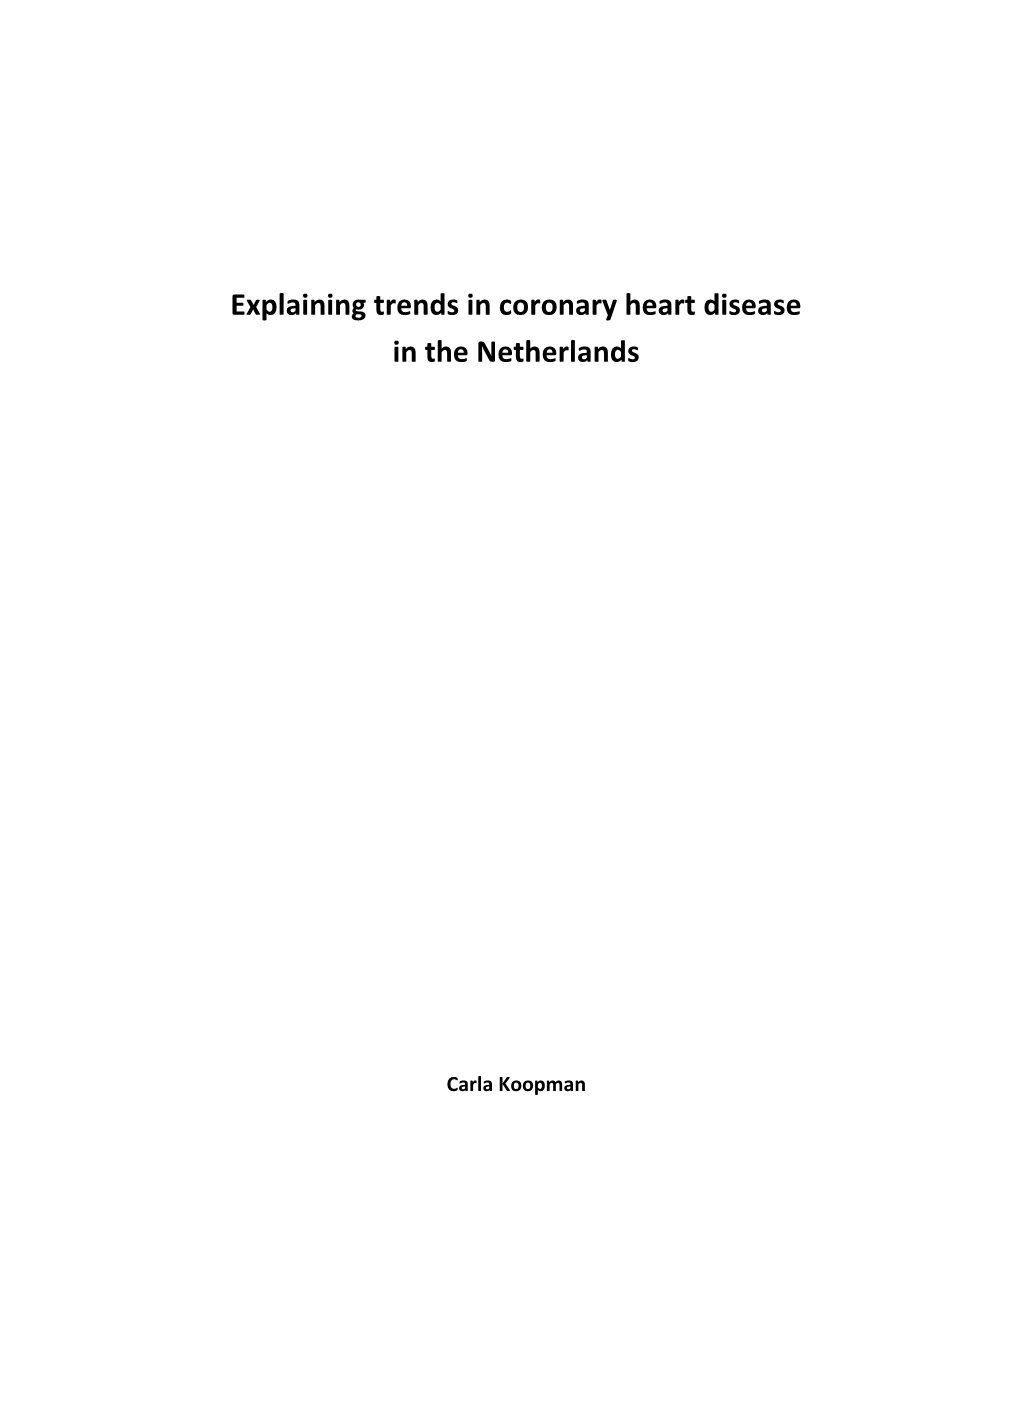 Explaining Trends in Coronary Heart Disease in the Netherlands